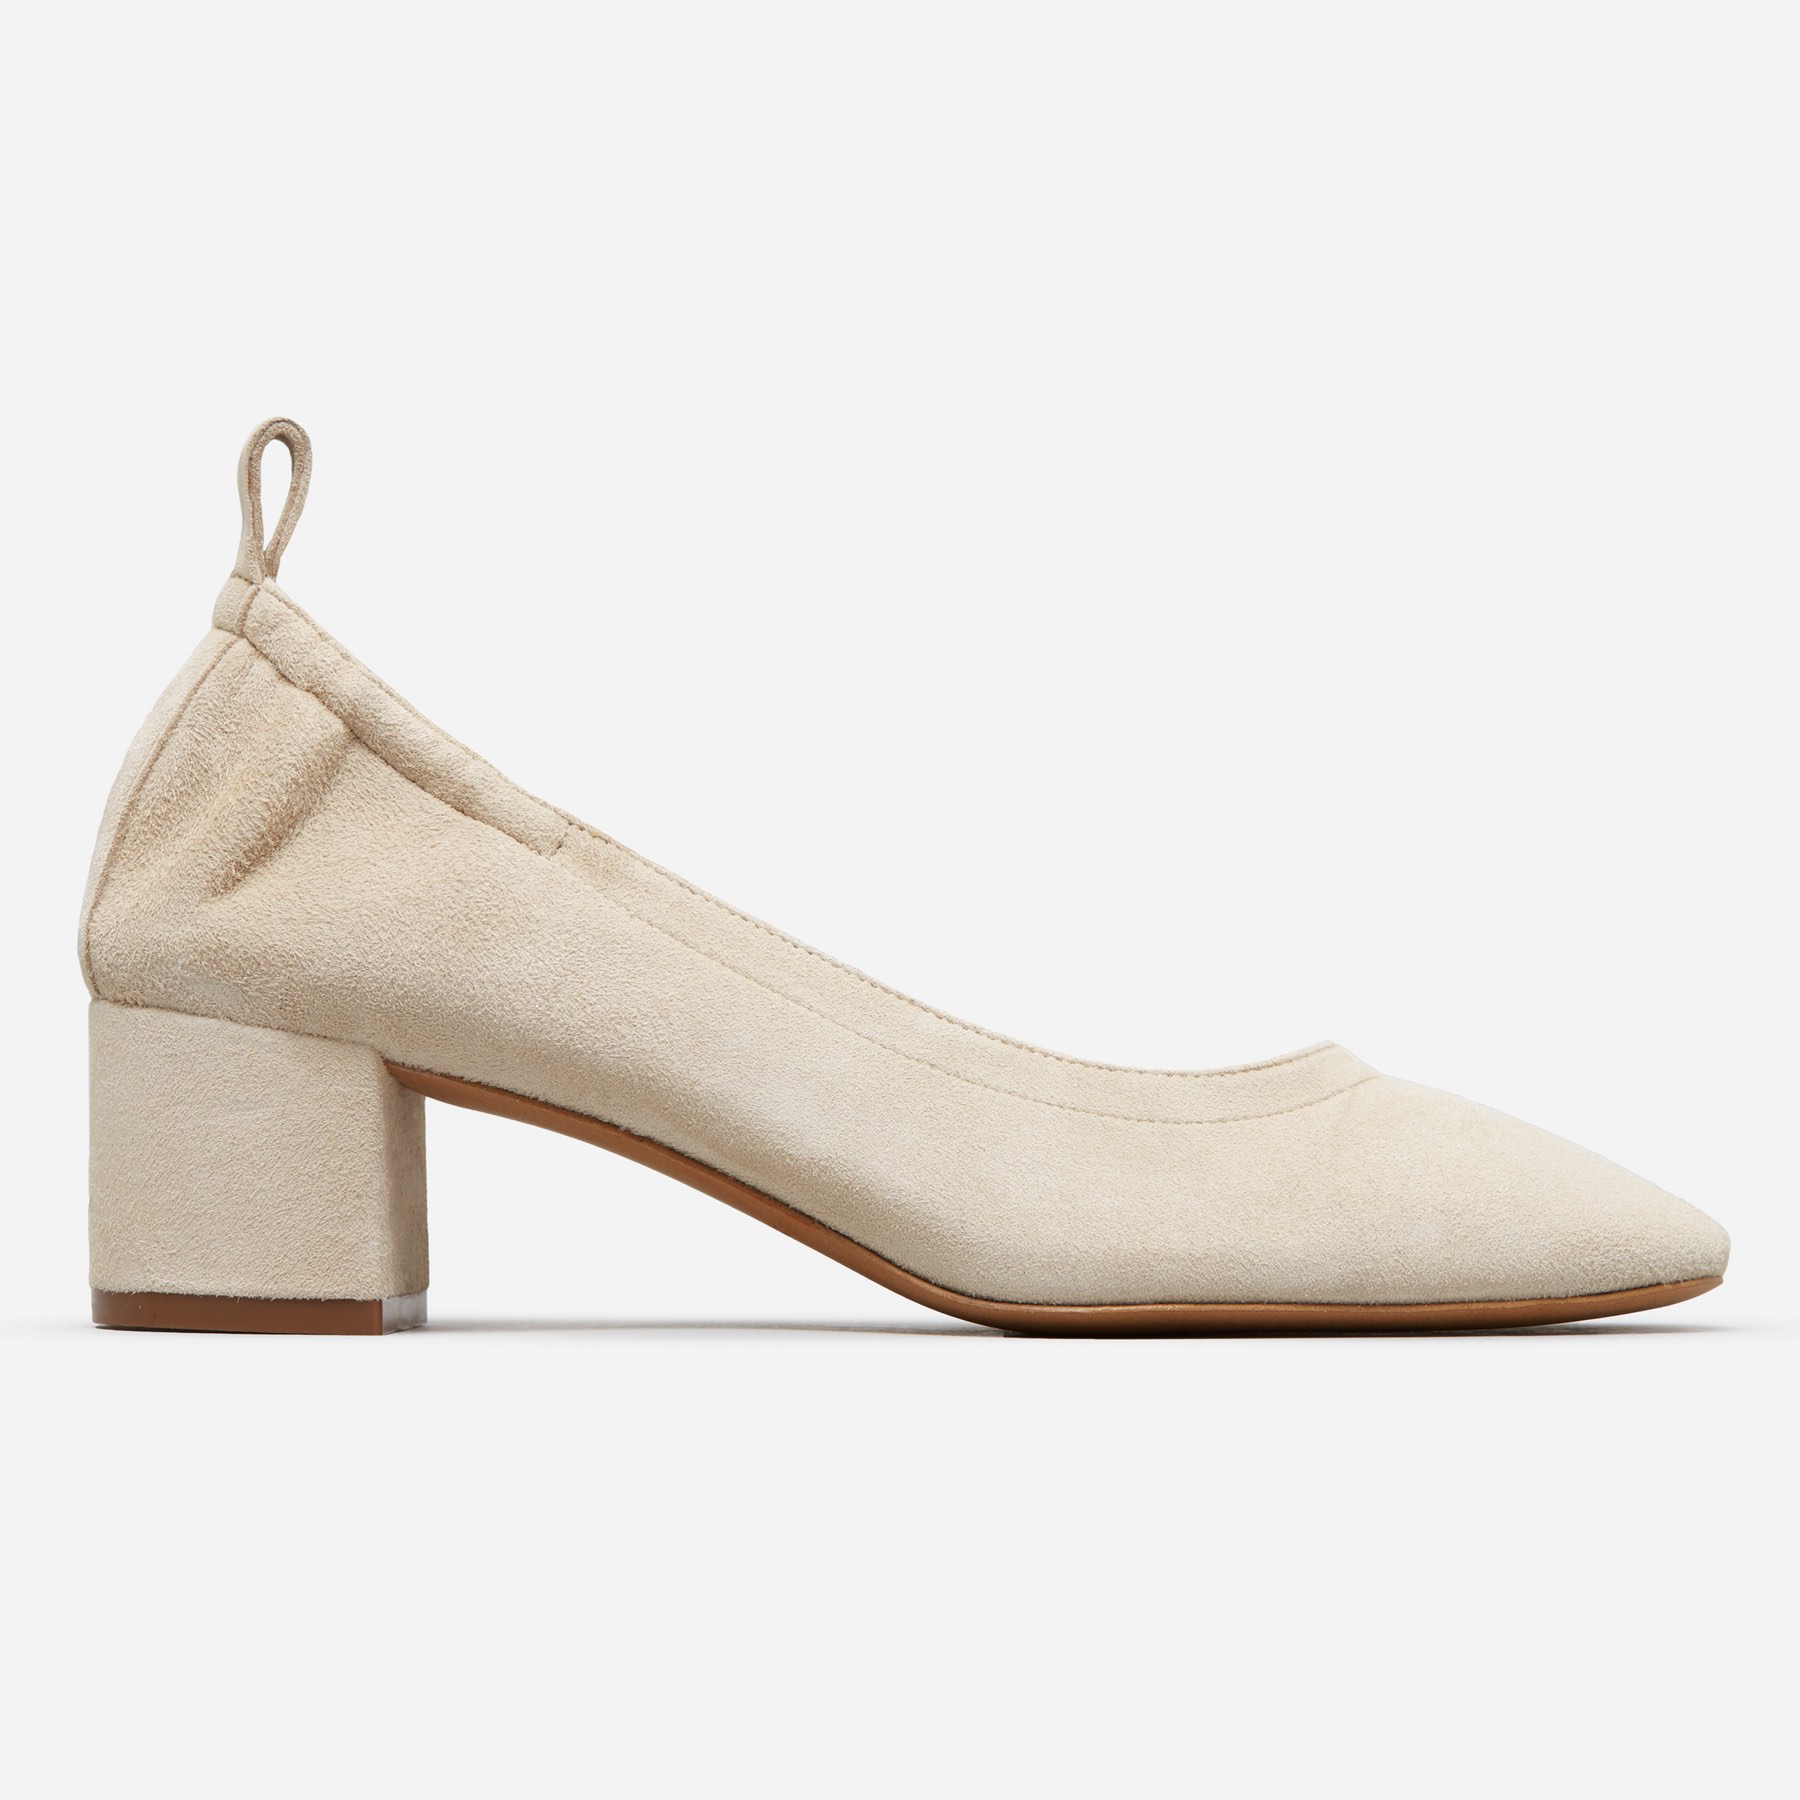 The Day Heel in Suede